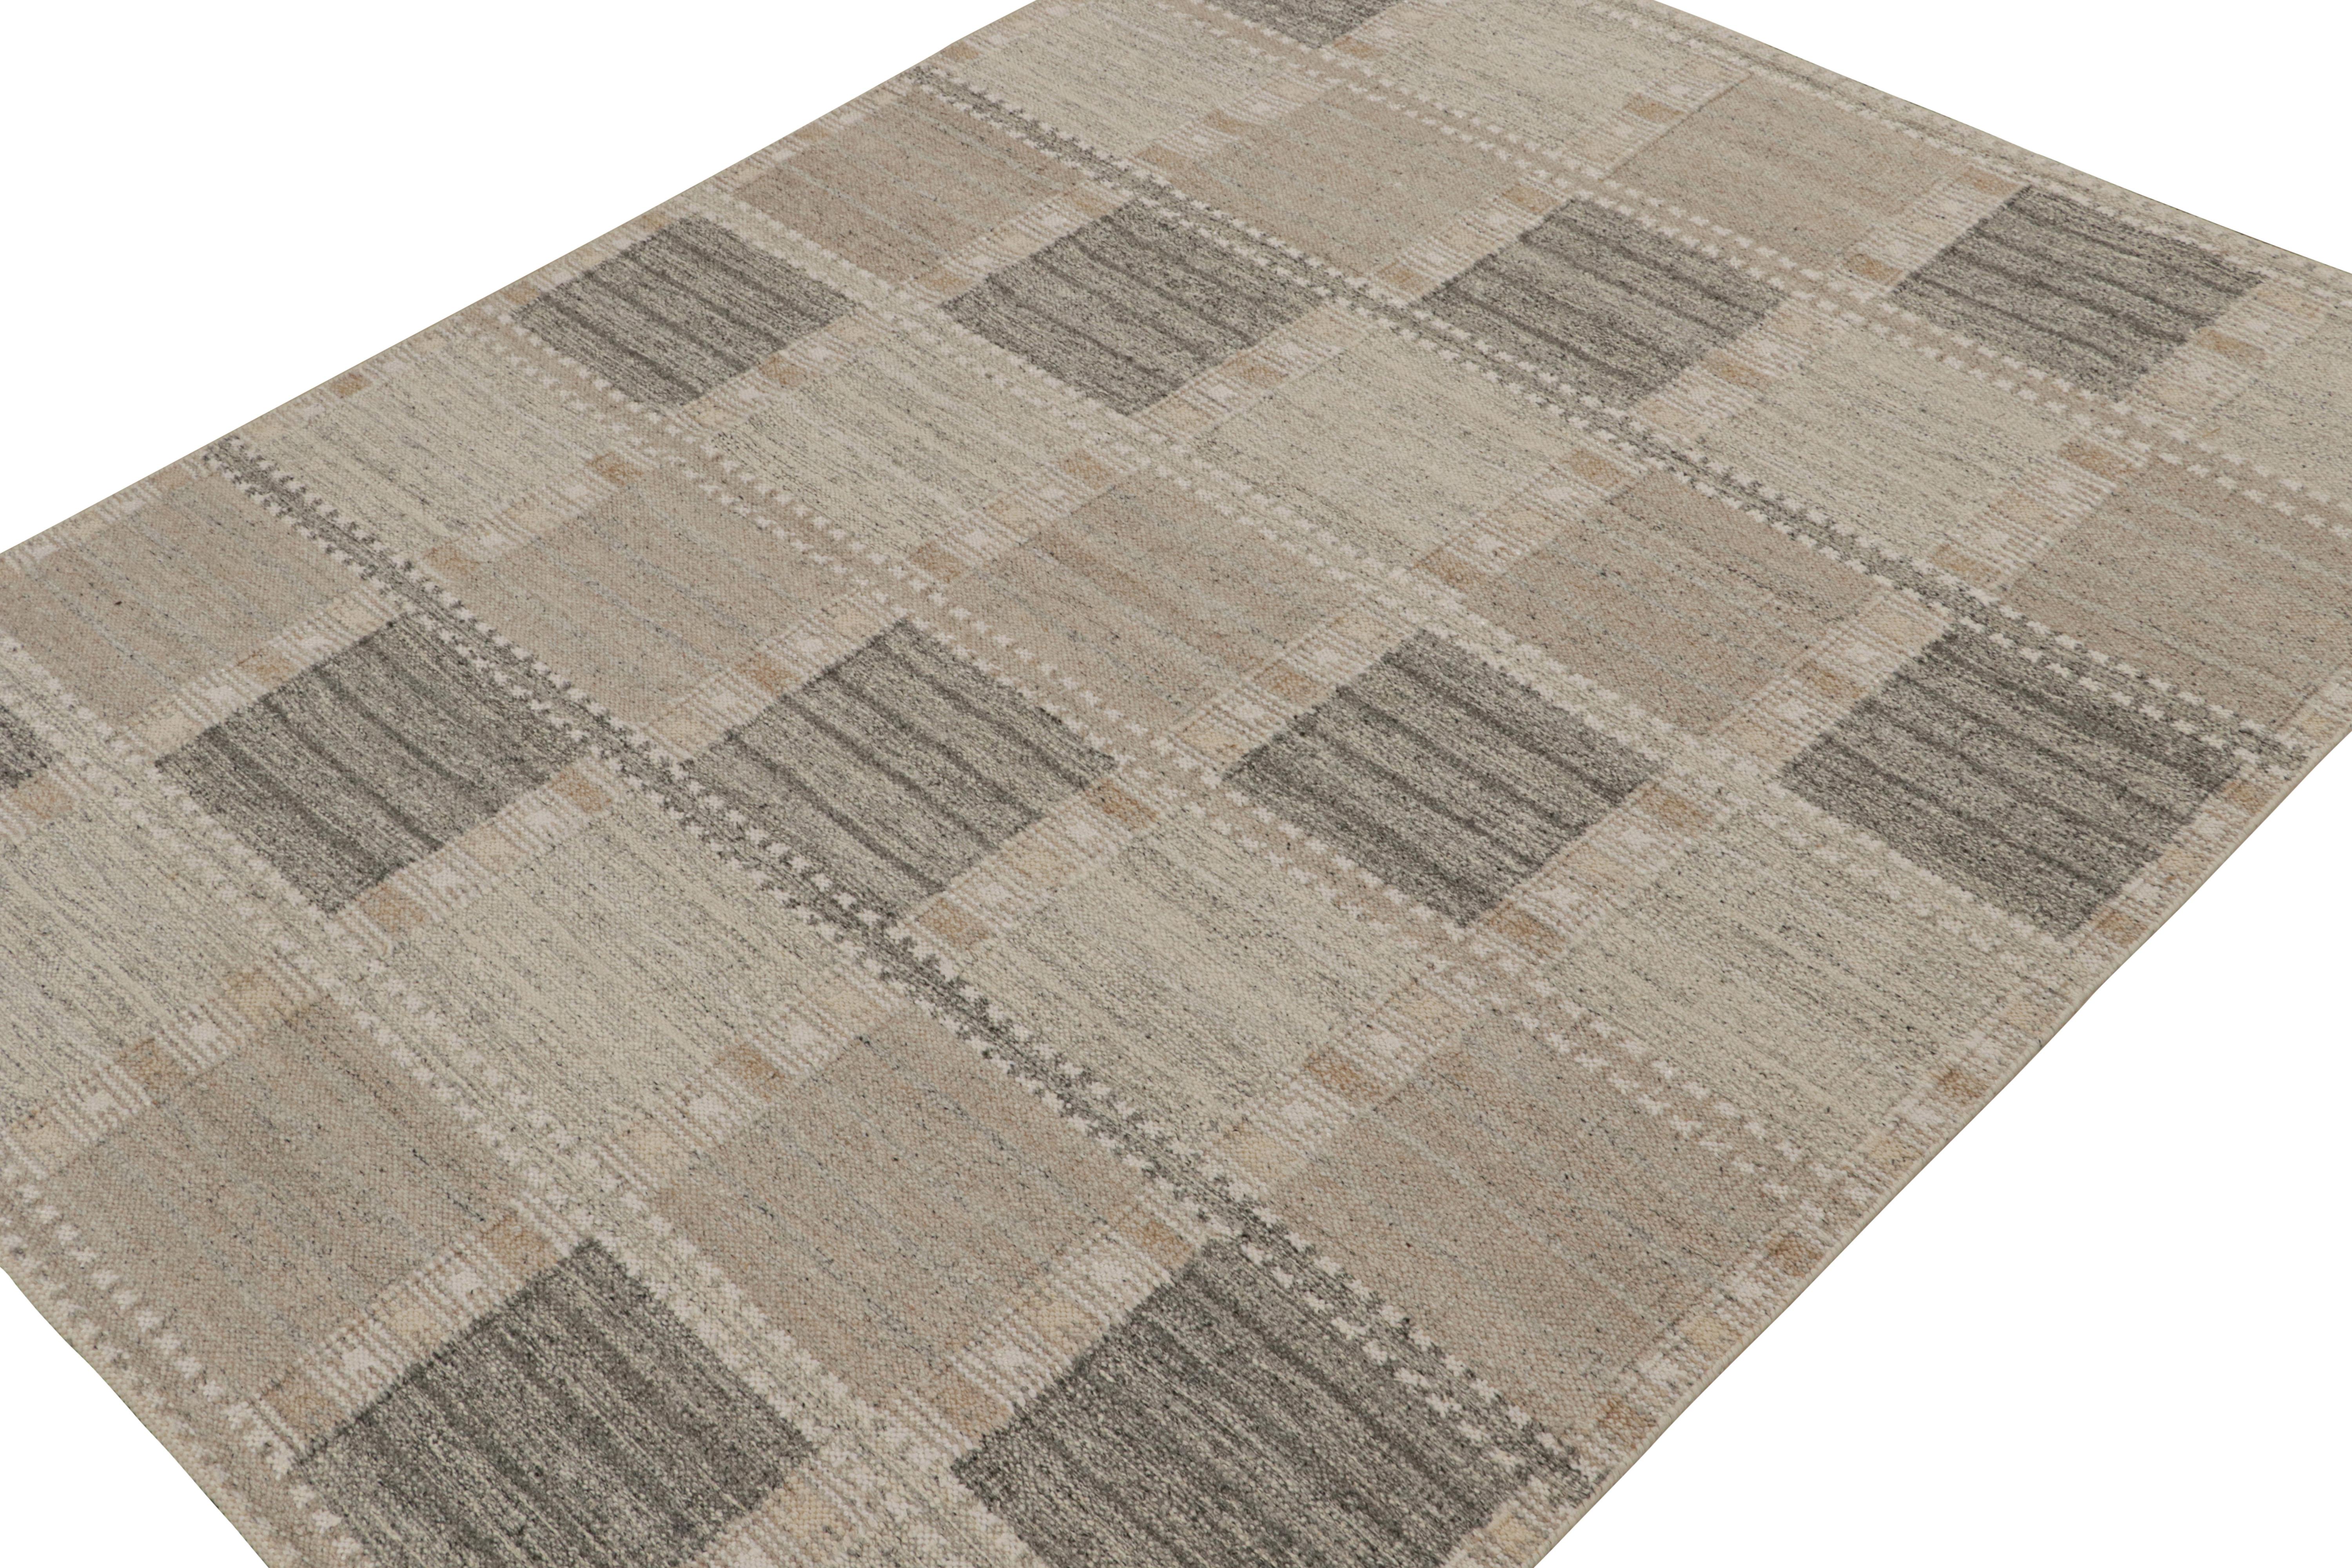 This 8x10 flat weave rug is a new addition to the Scandinavian Kilim collection by Rug & Kilim. Handwoven in wool, cotton and natural yarns, its design reflects a contemporary take on mid-century Rollakans and Swedish Deco style.

On the